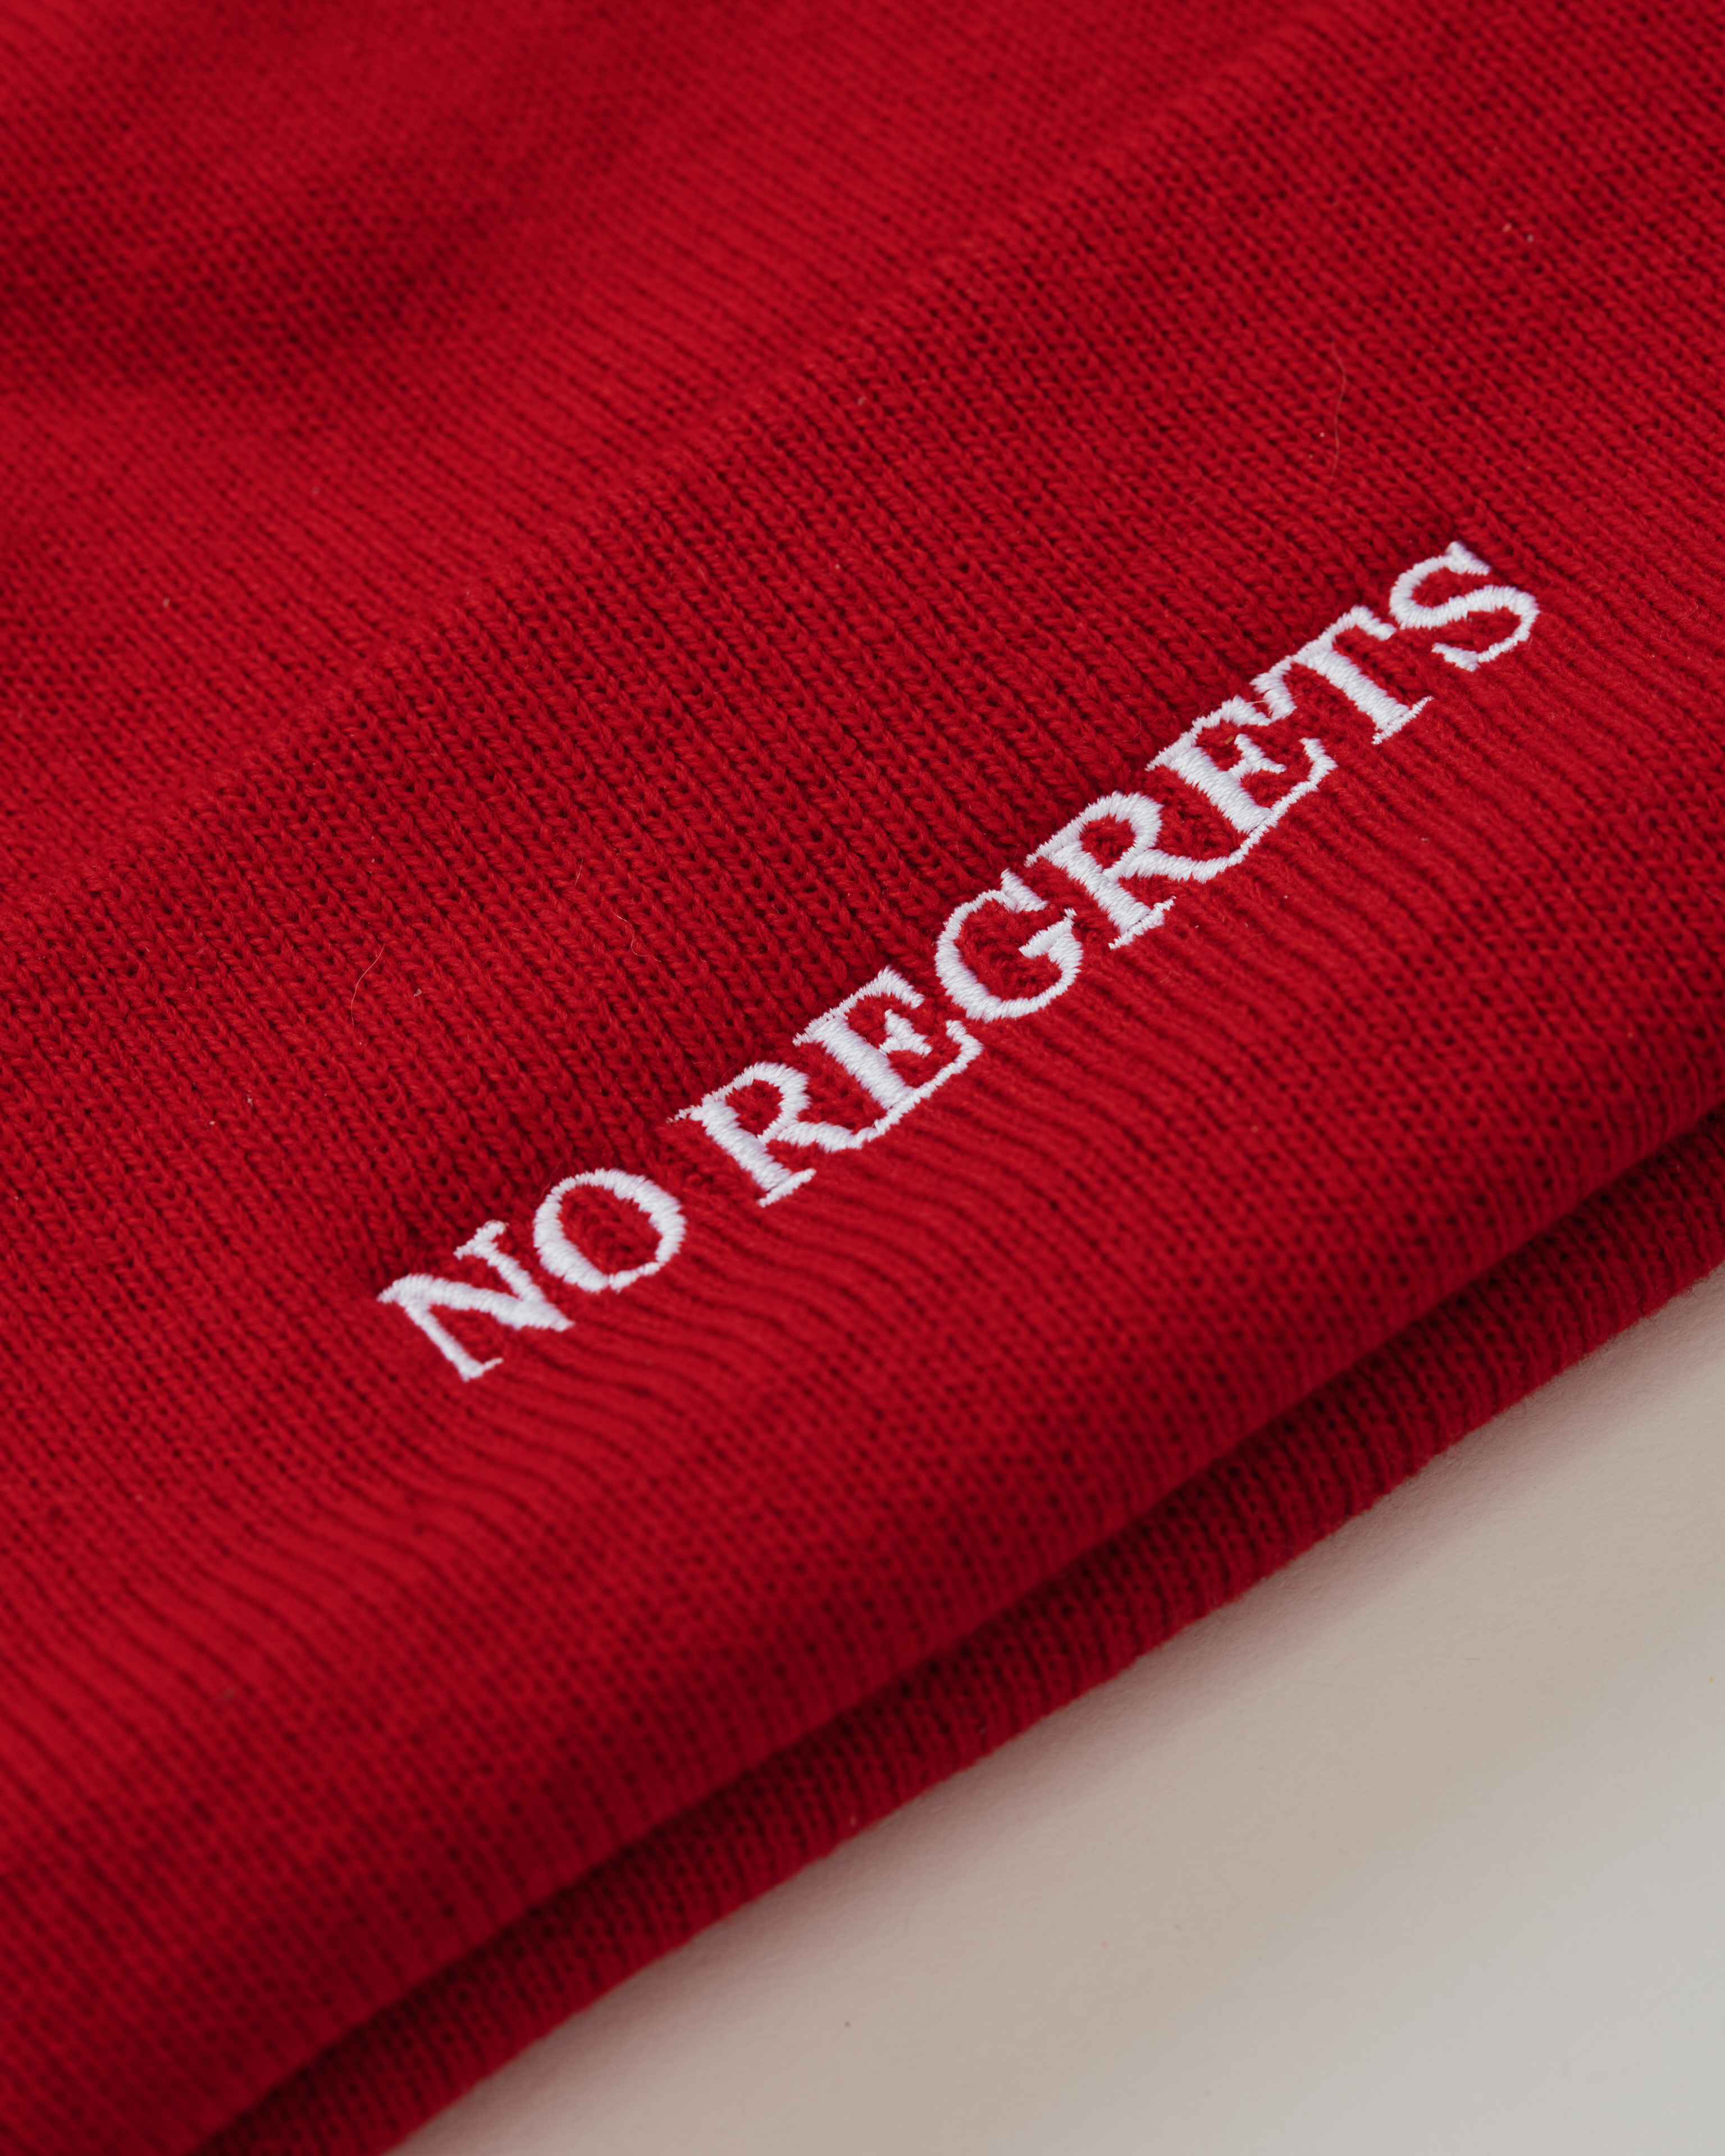 No Regrets beanie in red close-up